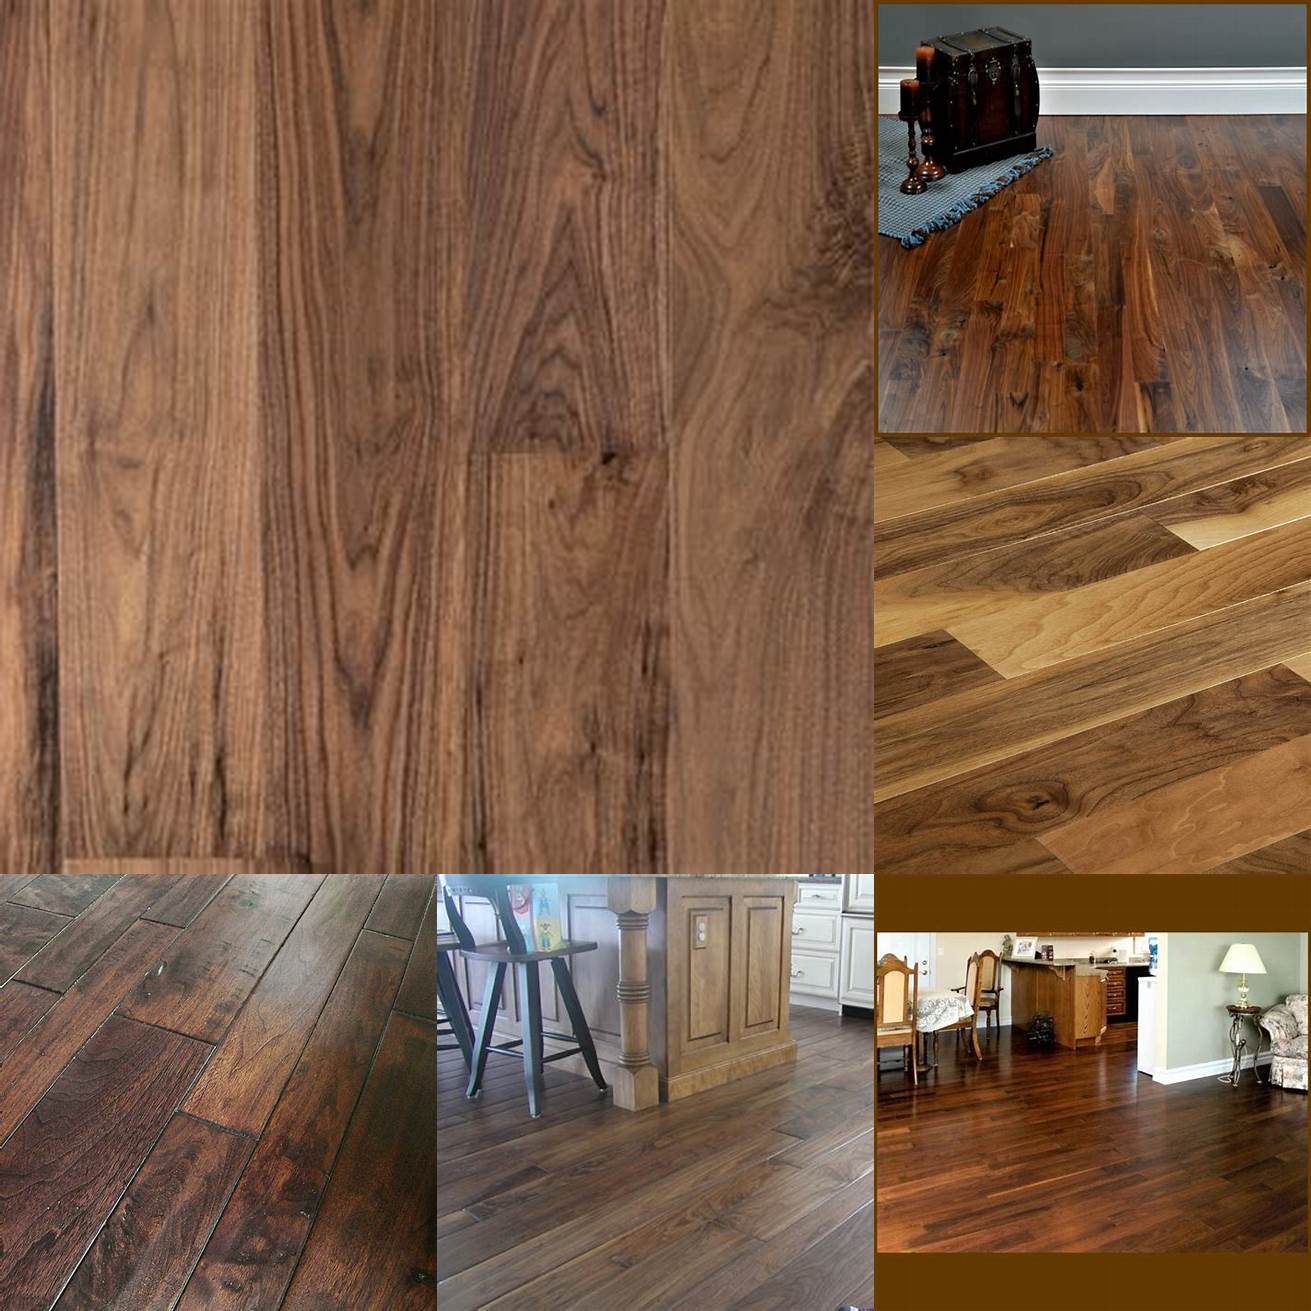 1 Durability Walnut is a hardwood which means it is very strong and can withstand years of use without showing signs of wear and tear